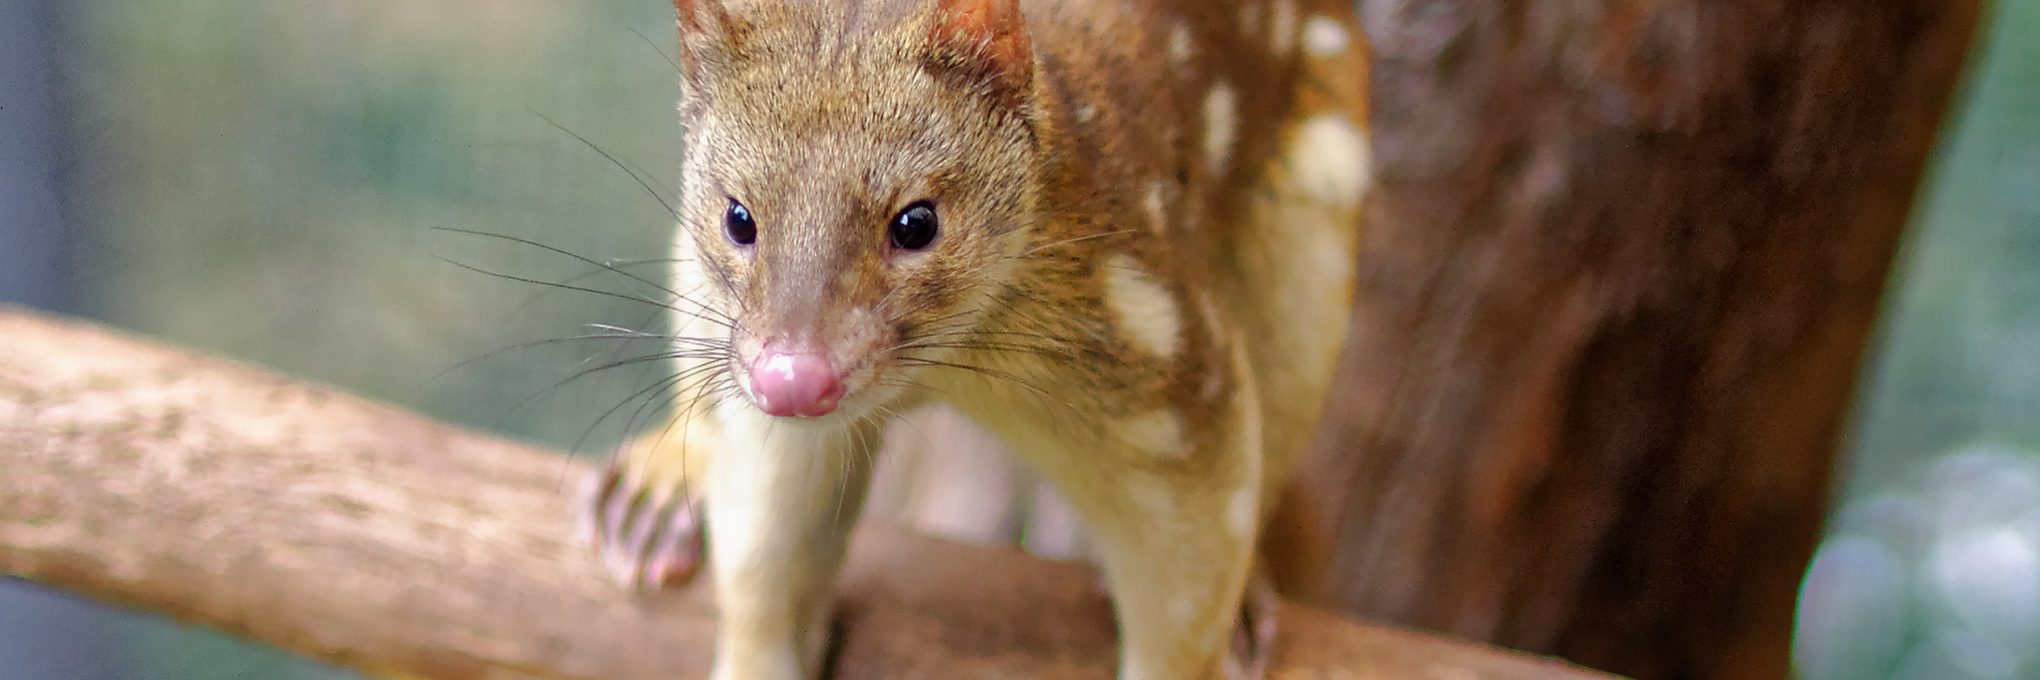 A farmer in South Australia has caught a rare spotted-tailed quoll after it attacked one of his chickens.